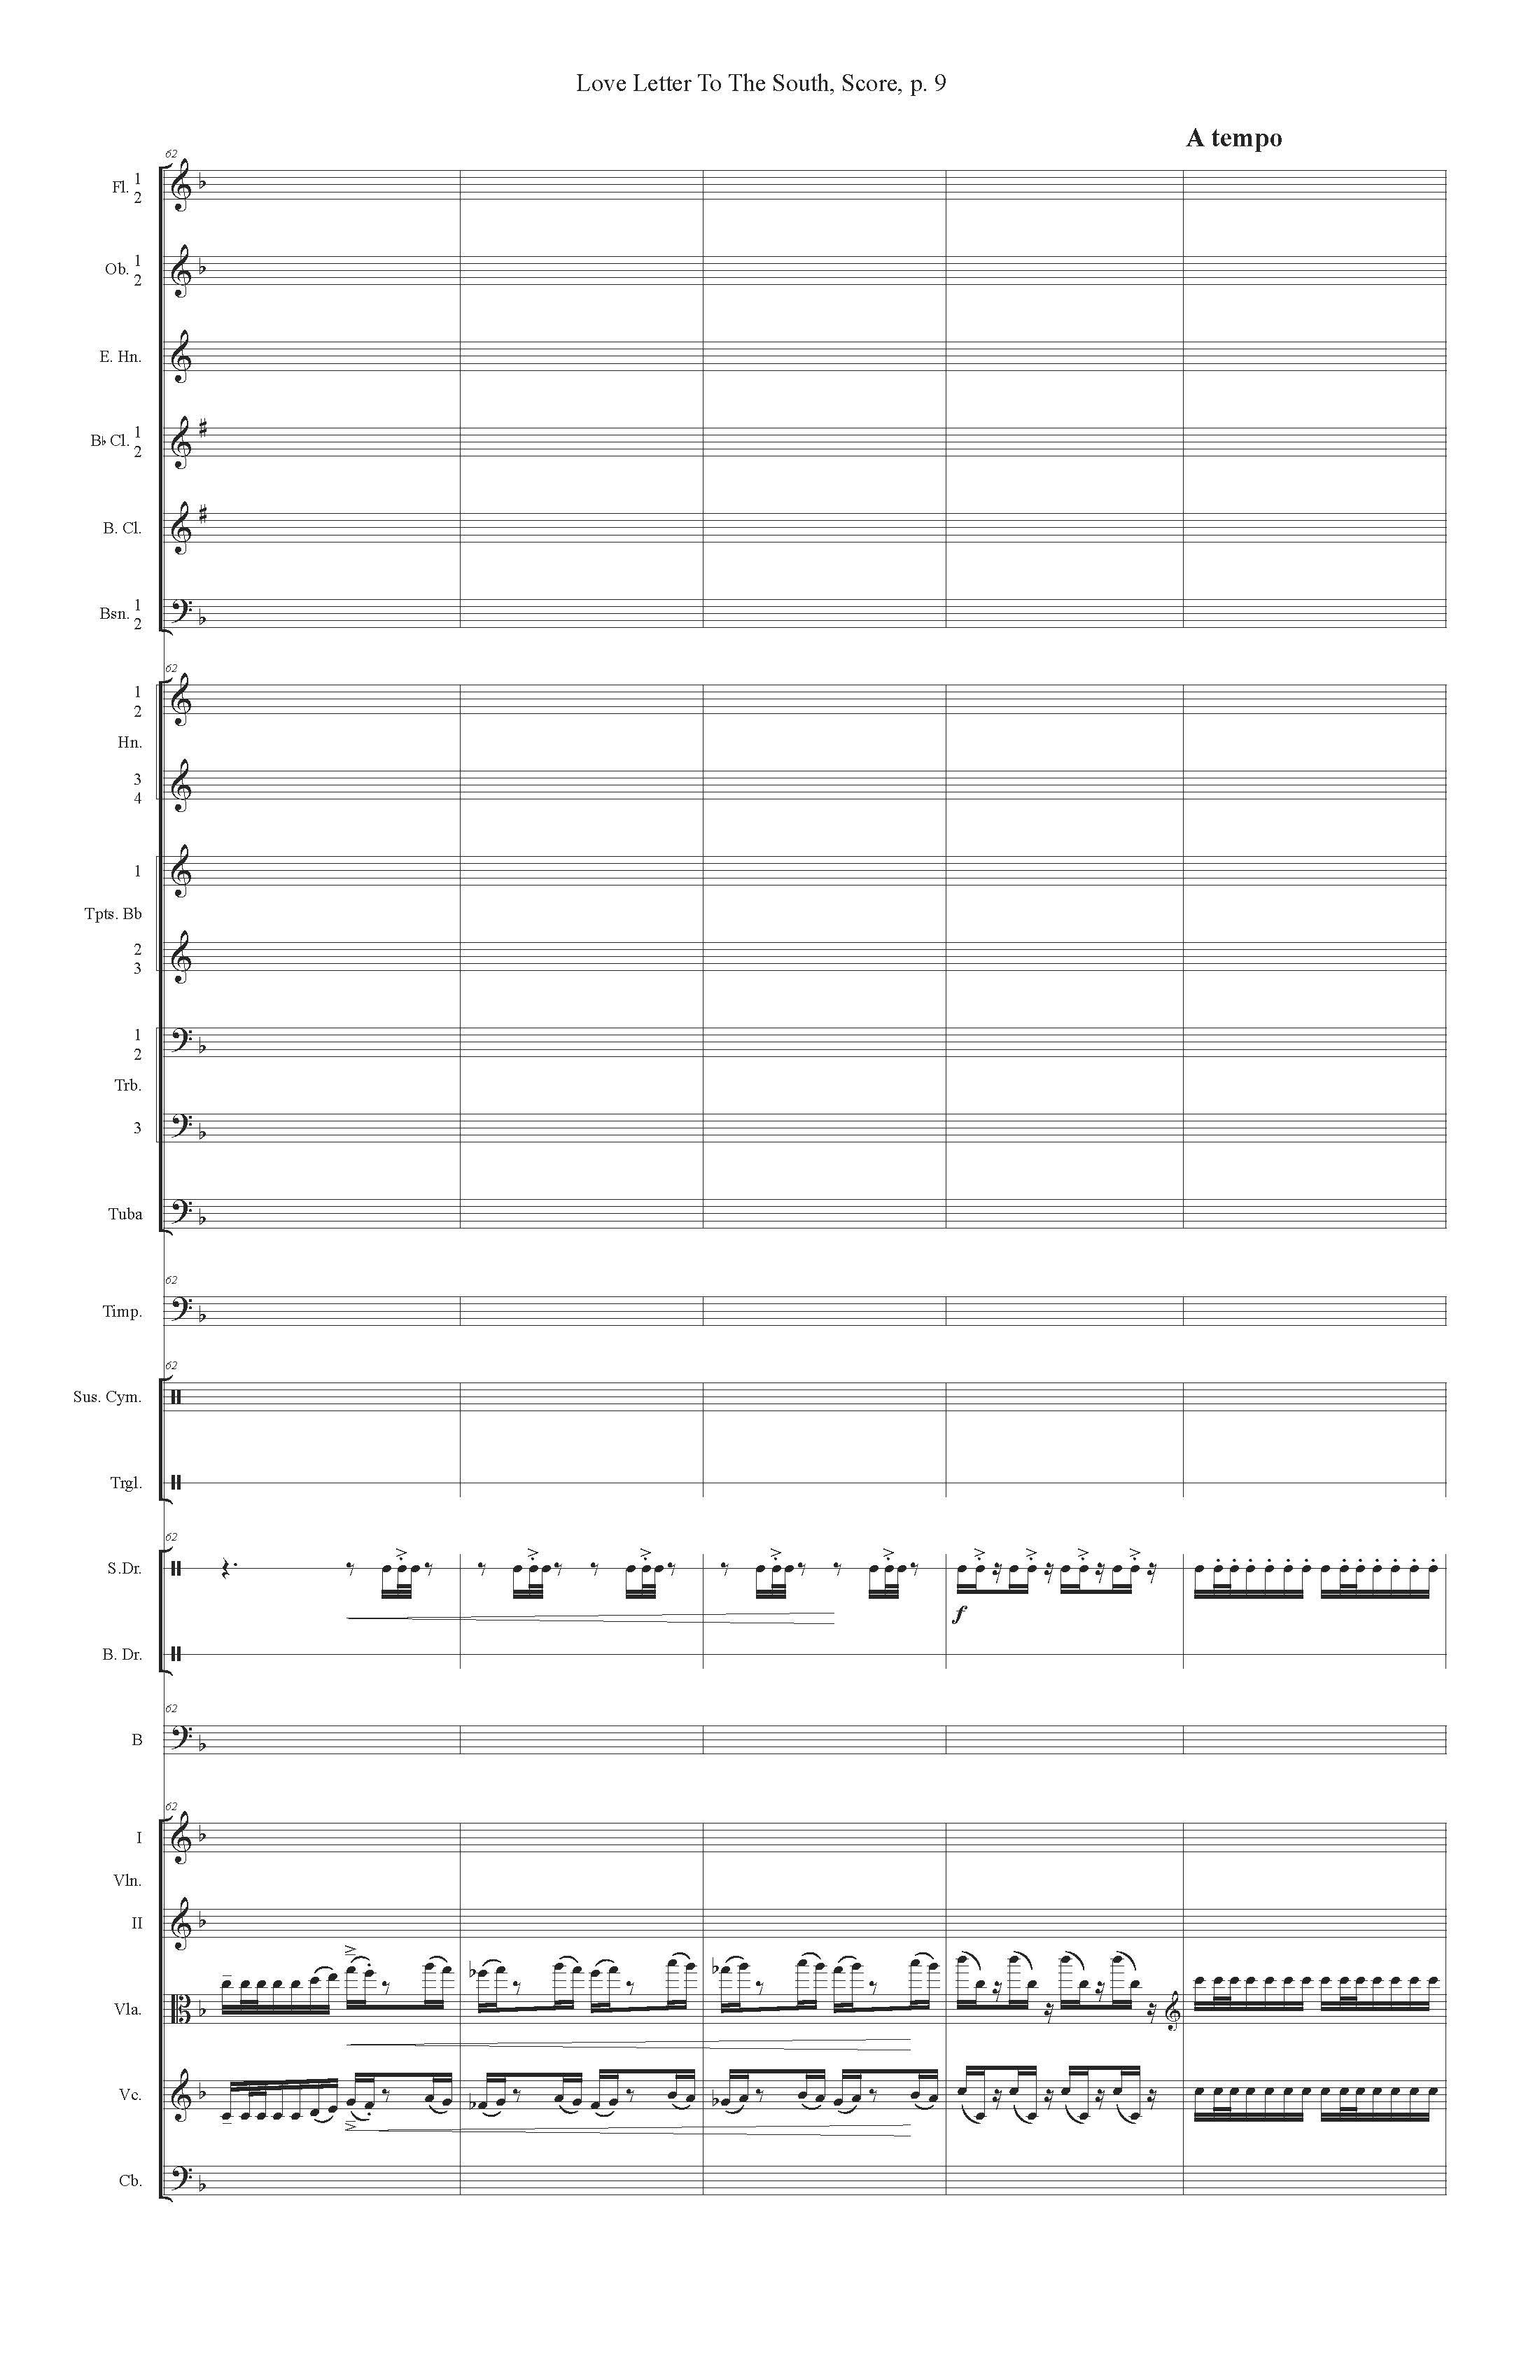 LOVE LETTER TO THE SOUTH ORCH - Score_Page_09.jpg